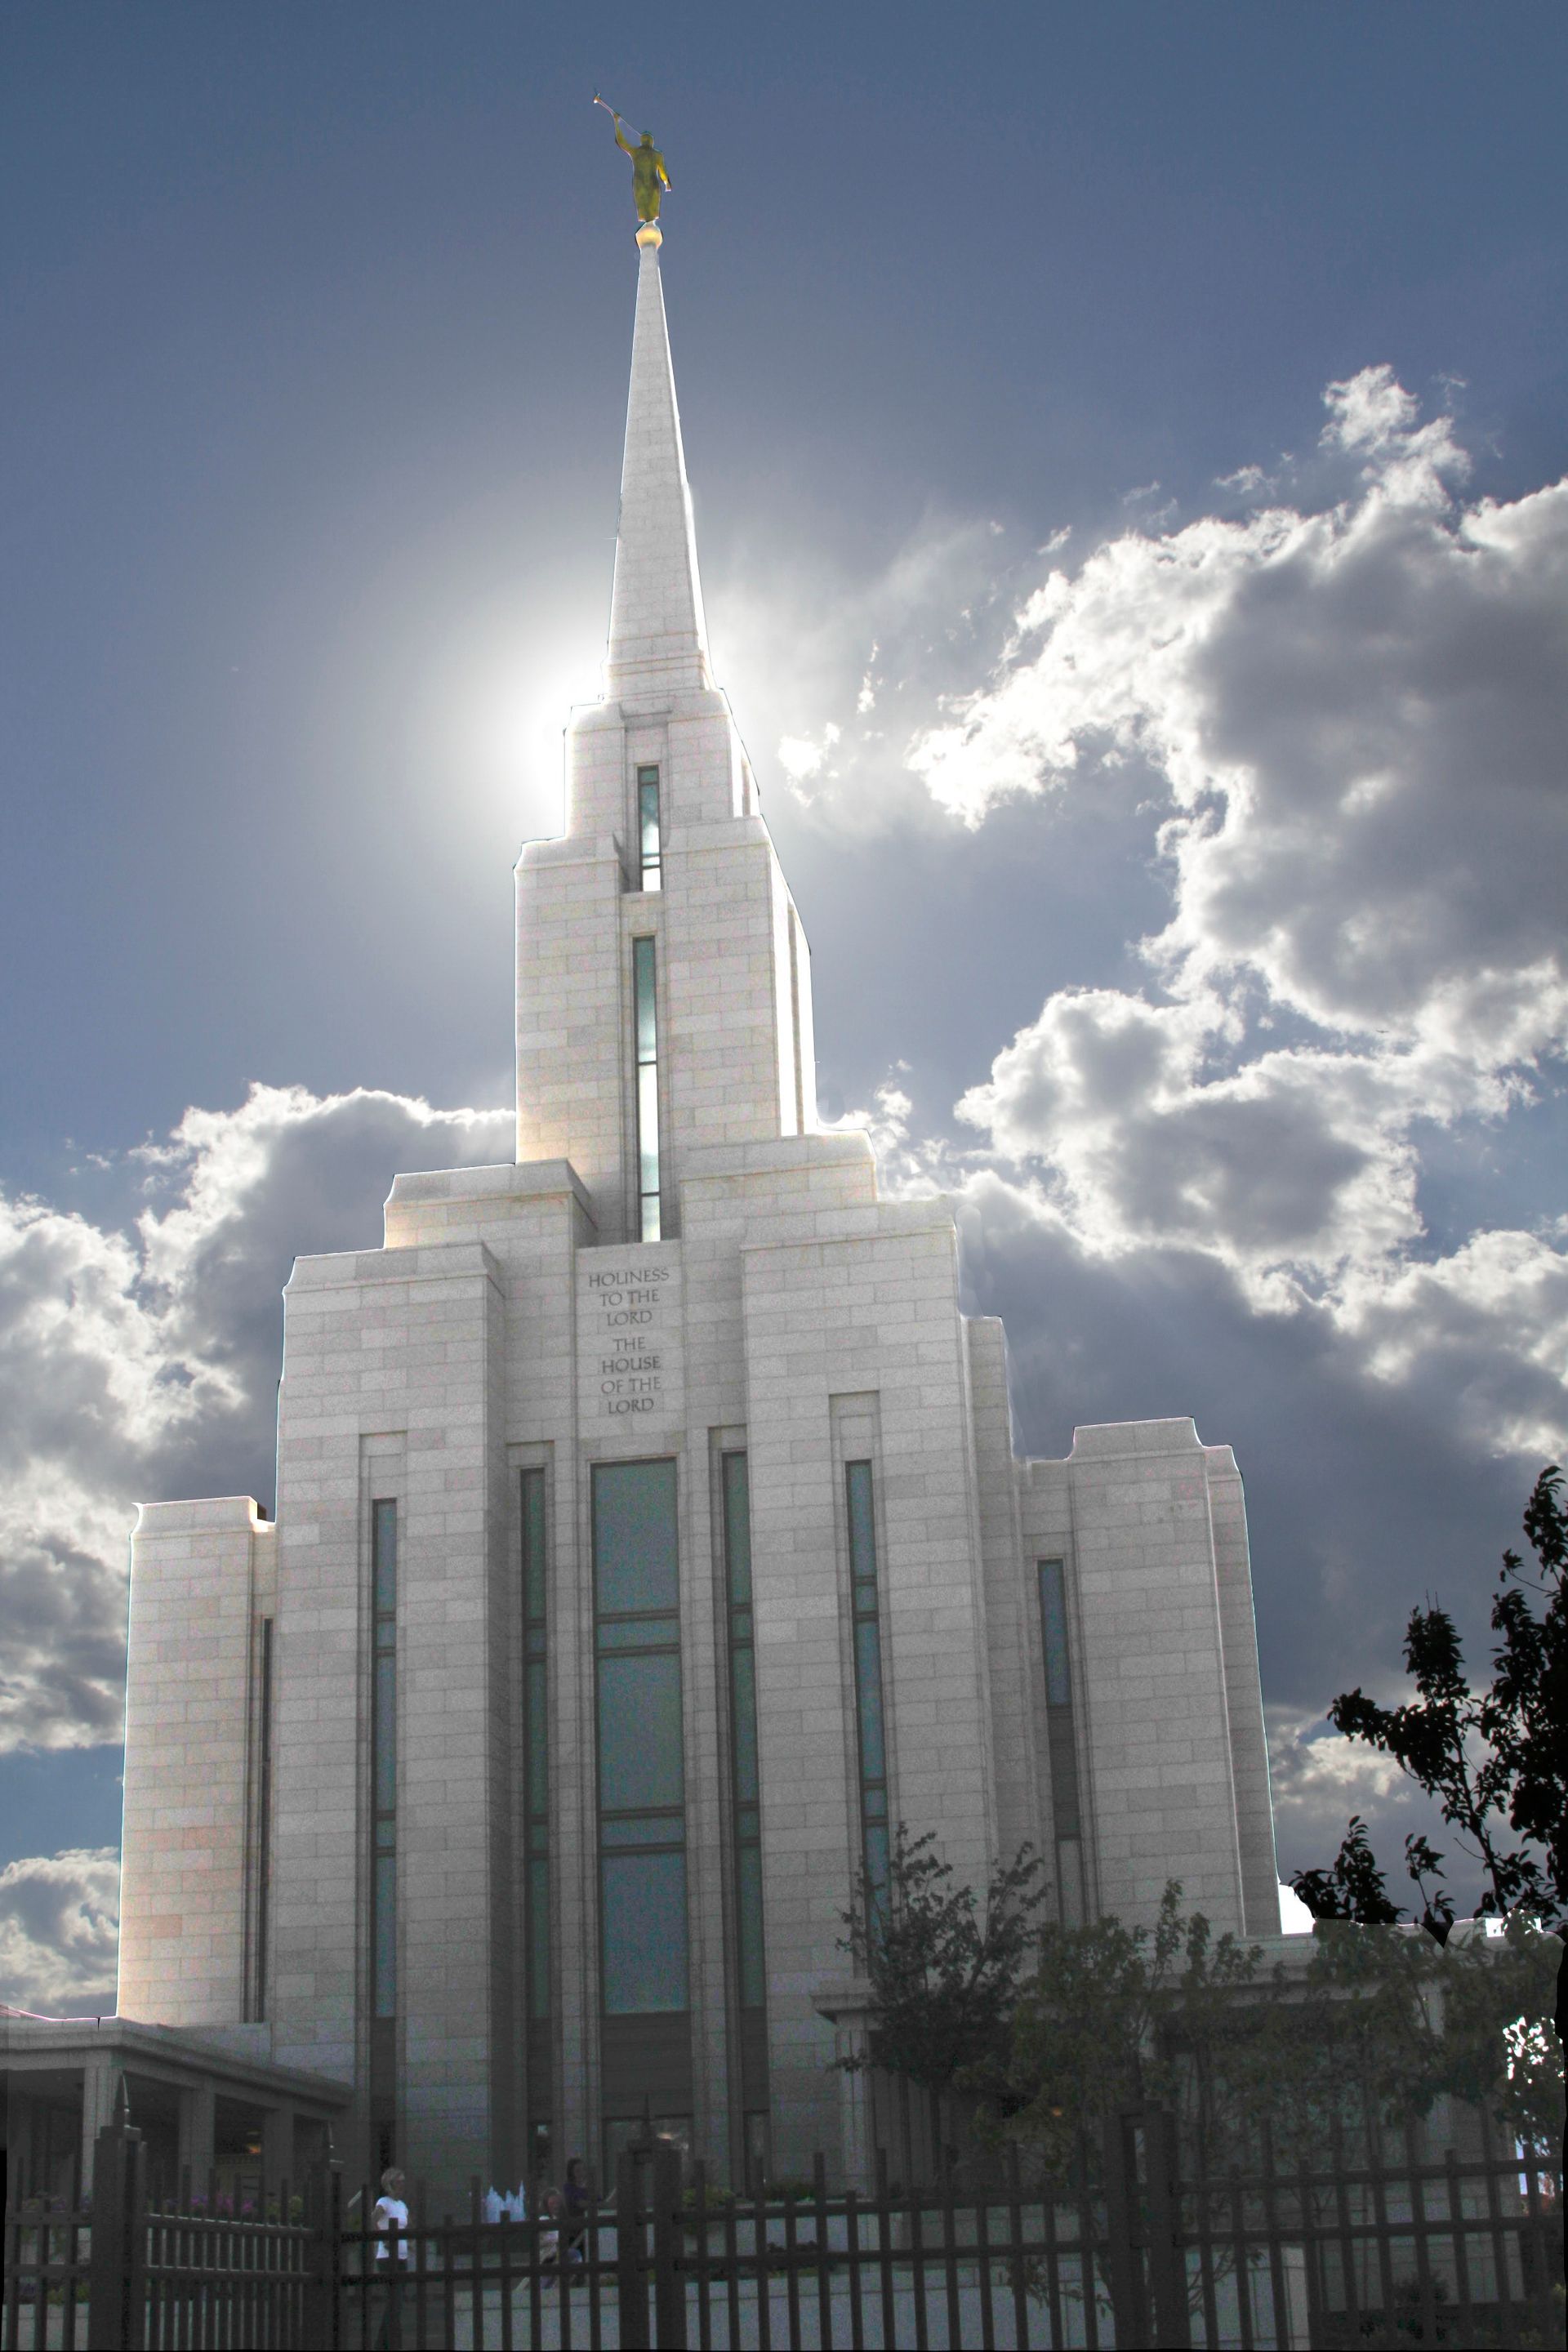 The Oquirrh Mountain Utah Temple, including entrance.